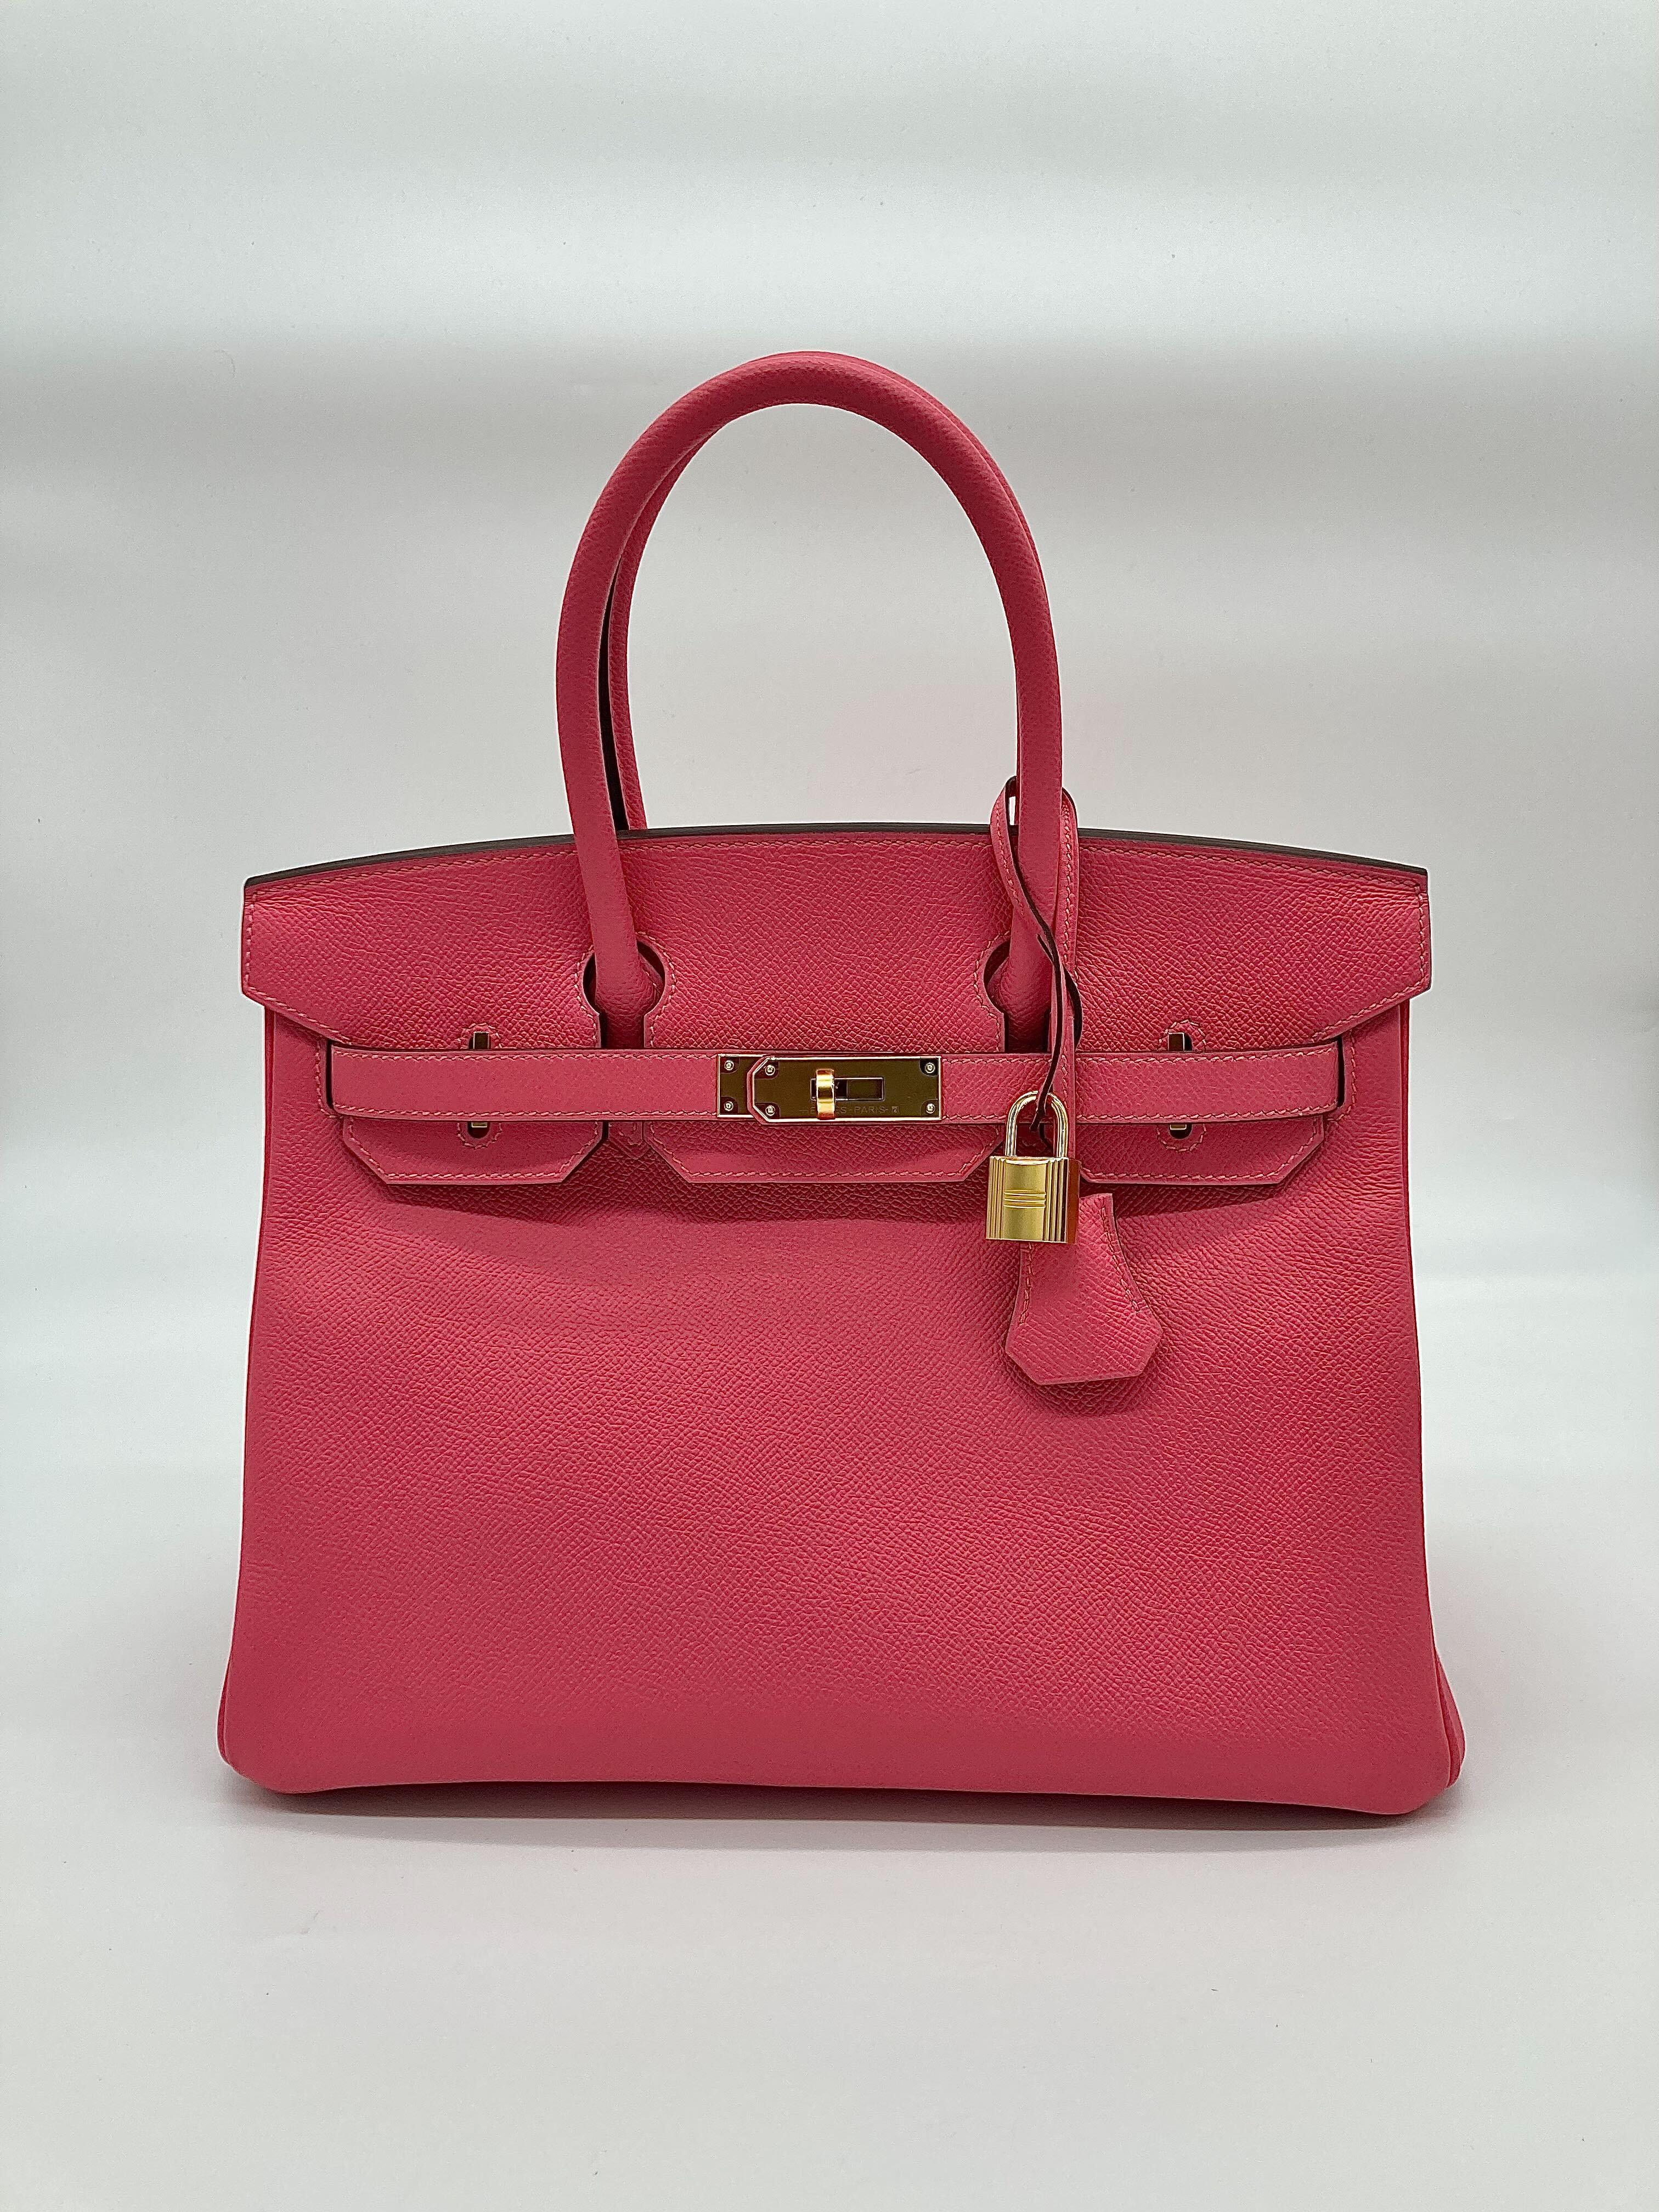 Hermes Birkin 30 Epsom Leather 8W Rose Azalee, Gold Hardware

Condition: Brand New
Measurements: 30cm x 23.5cm x 16cm
Material: Epsom Leather
Hardware: Gold Plated

*Comes with full original packaging.
*Full plastic on hardware.